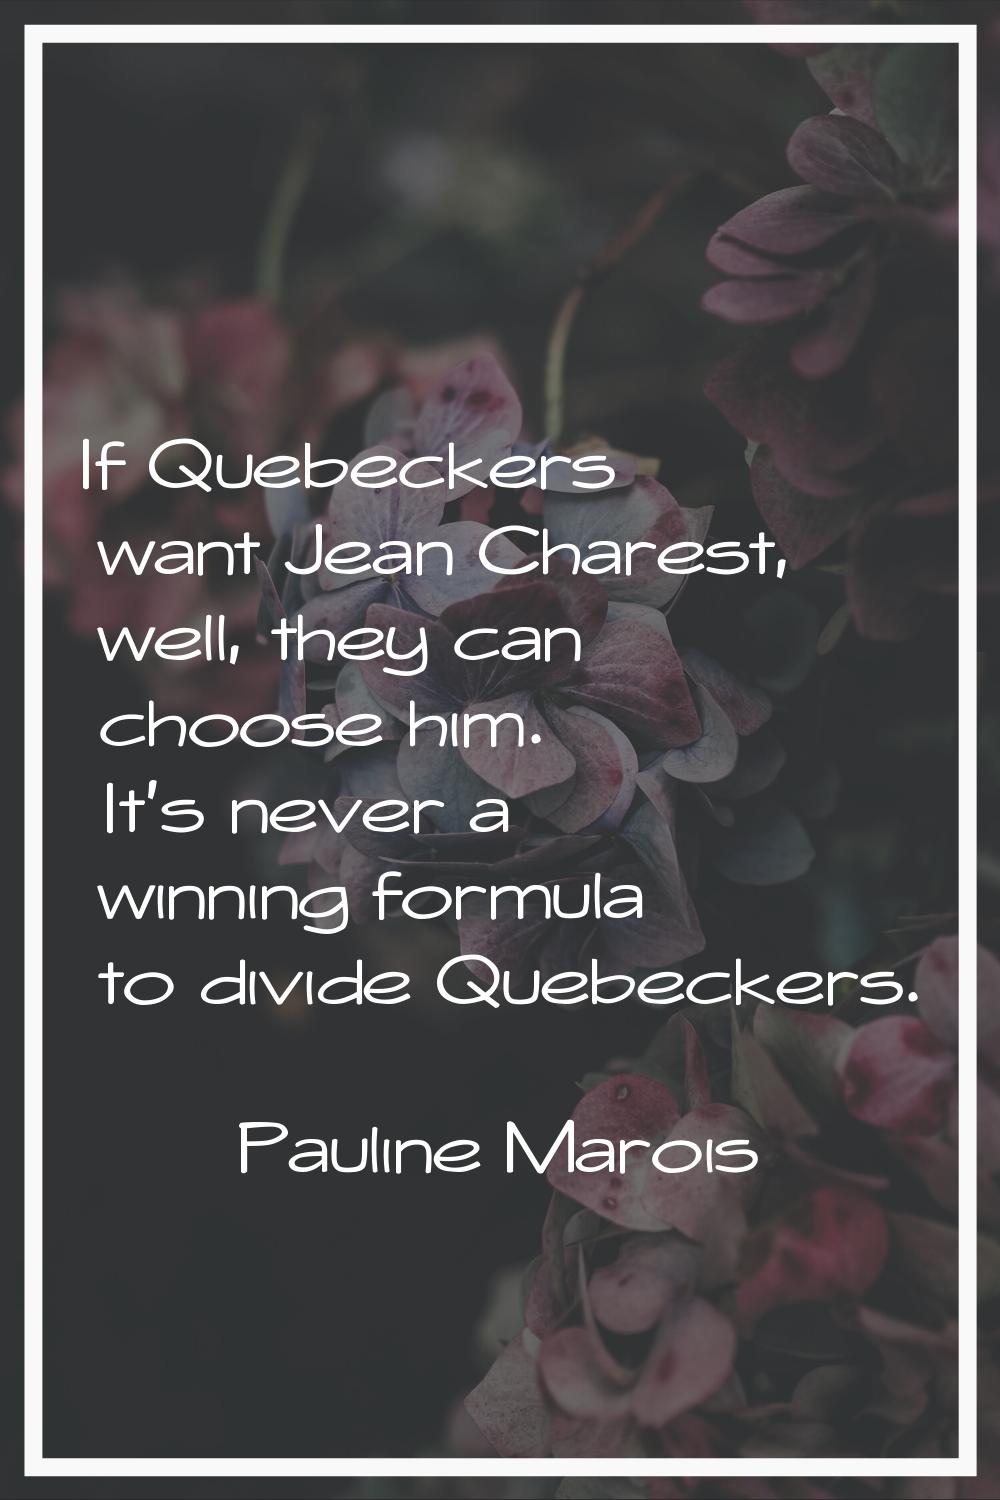 If Quebeckers want Jean Charest, well, they can choose him. It's never a winning formula to divide 